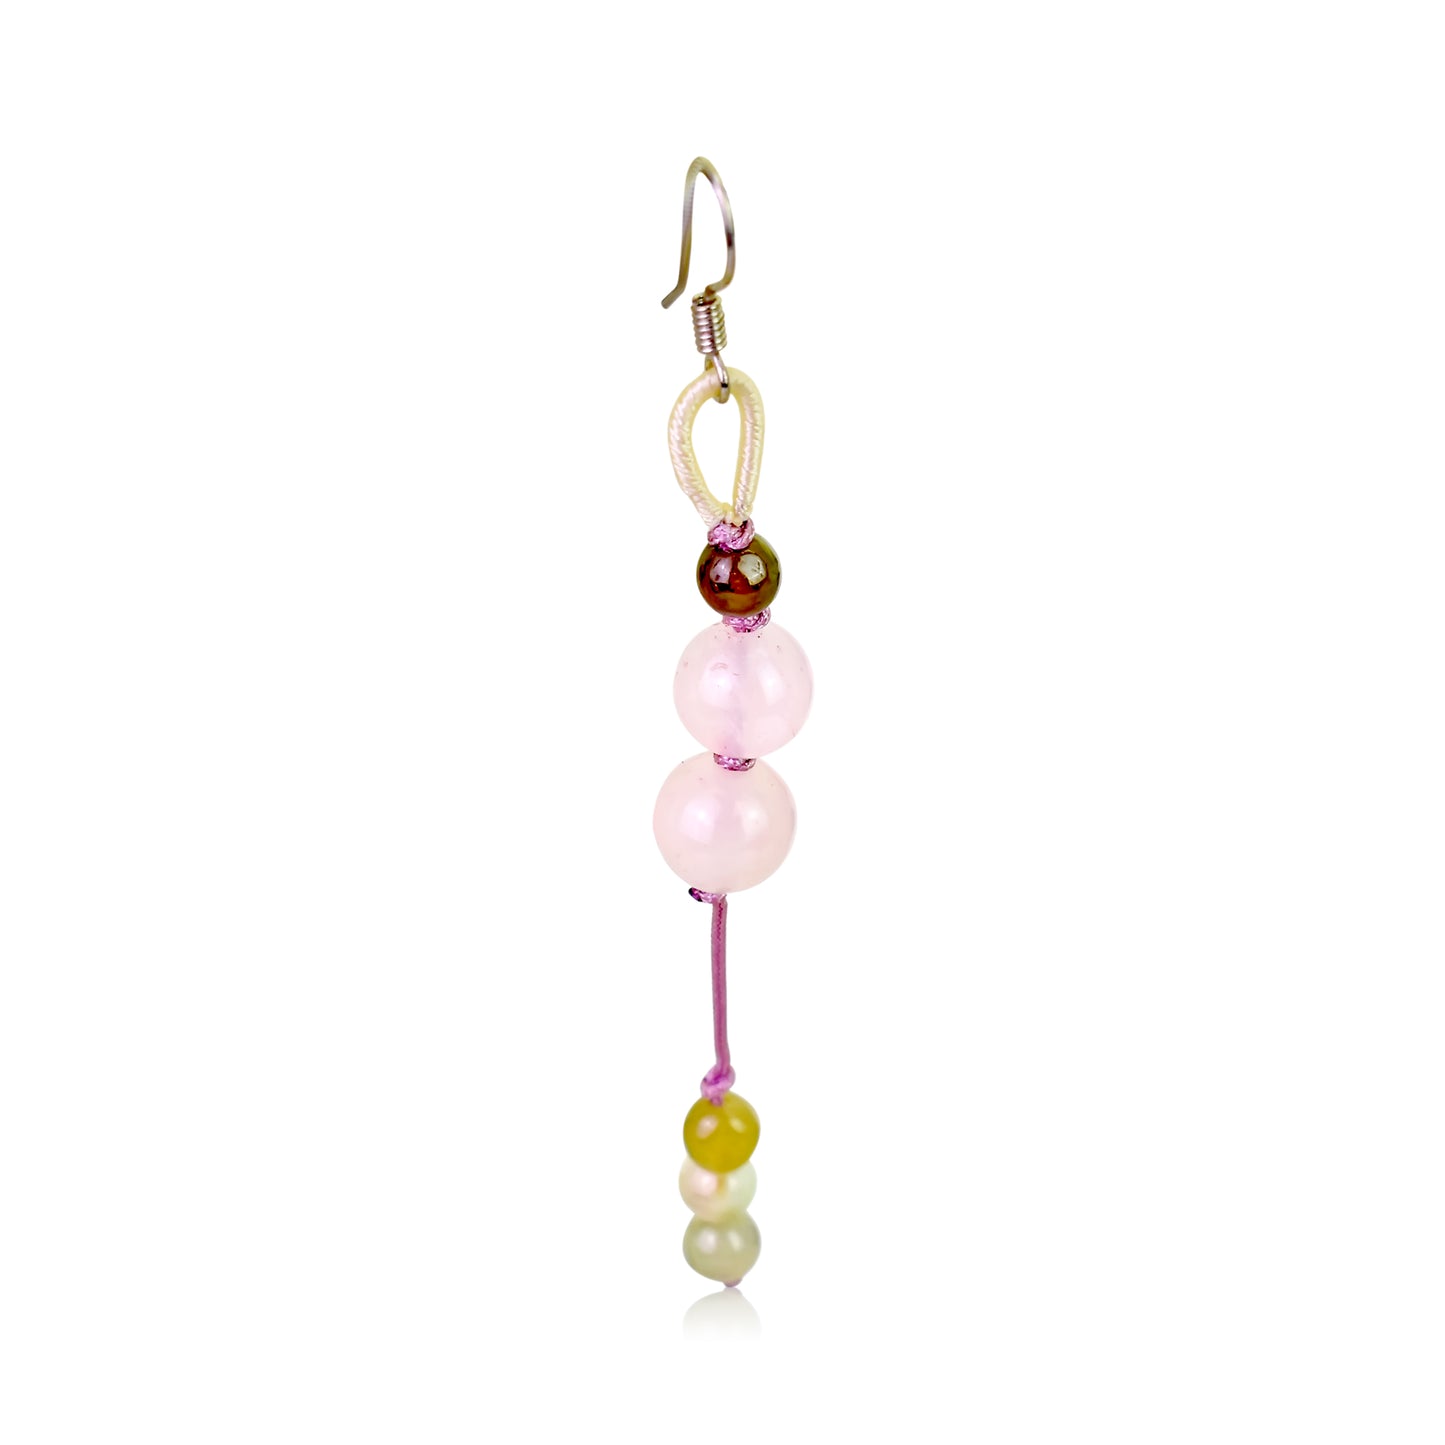 Add a Touch of Elegance with Artistic Beads Rose Quartz Earrings made with Purple Cord